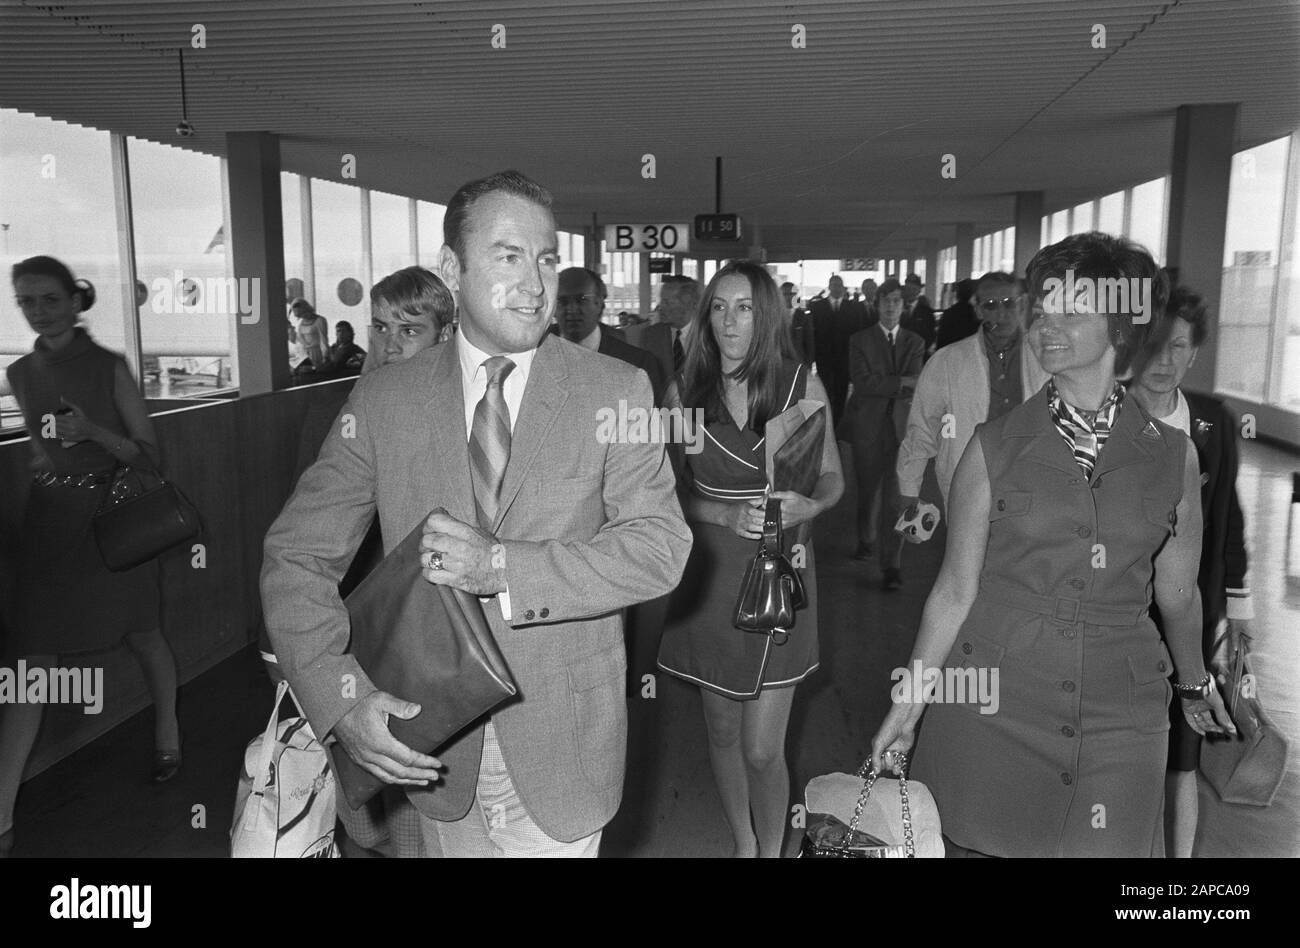 Arrival astronaut James Lovell (USA) with wife and 2 children at Schiphol Date: August 21, 1969 Keywords: SPEES, Children, arrivals, astronauts Personal name: James Lovell Stock Photo